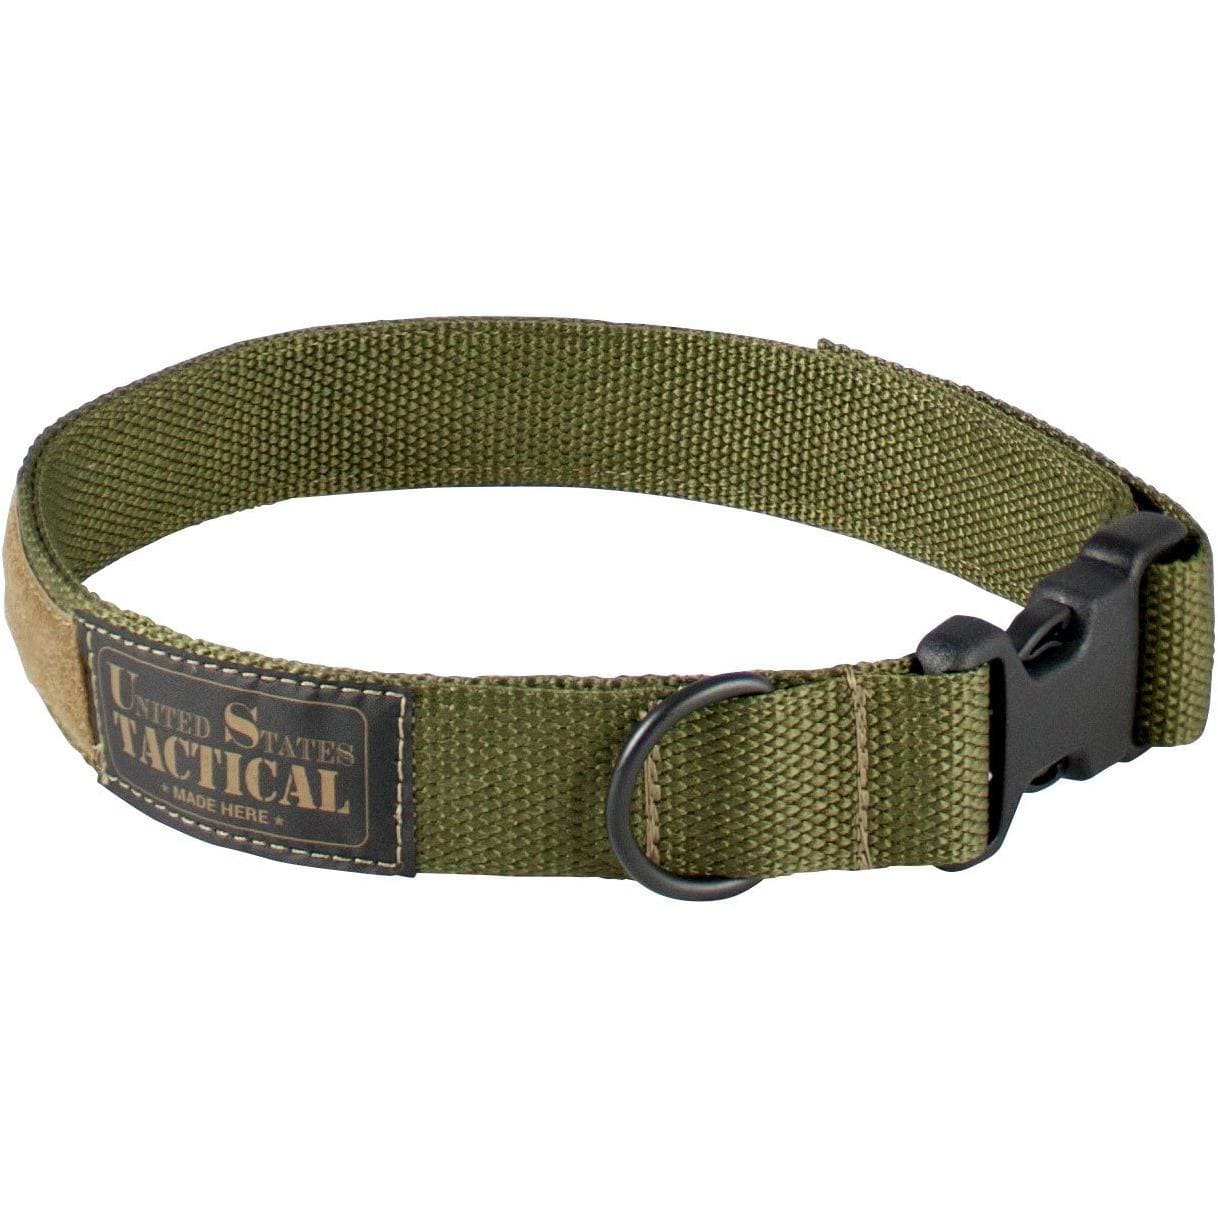 United States Tactical Tactical Gear M / Olive Drab United States Tactical Dog Collar with Quick-Release Buckle